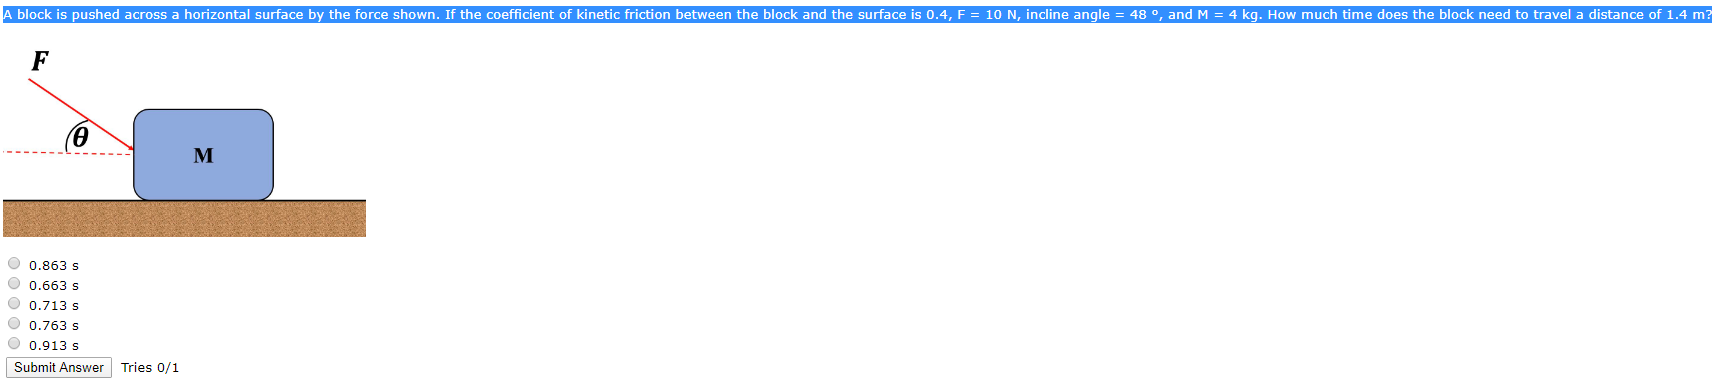 A block is pushed across a horizontal surface by the force shown. If the coefficient of kinetic friction between the block and the surface is 0.4, F = 10 N, incline angle = 48 °, and M = 4 kg. How much time does the block need to travela distance of 1.4 m?
M
O 0.863 s
O 0.663 s
O 0.713 s
O 0.763 s
O 0.913 s
Submit Answer Tries 0/1
